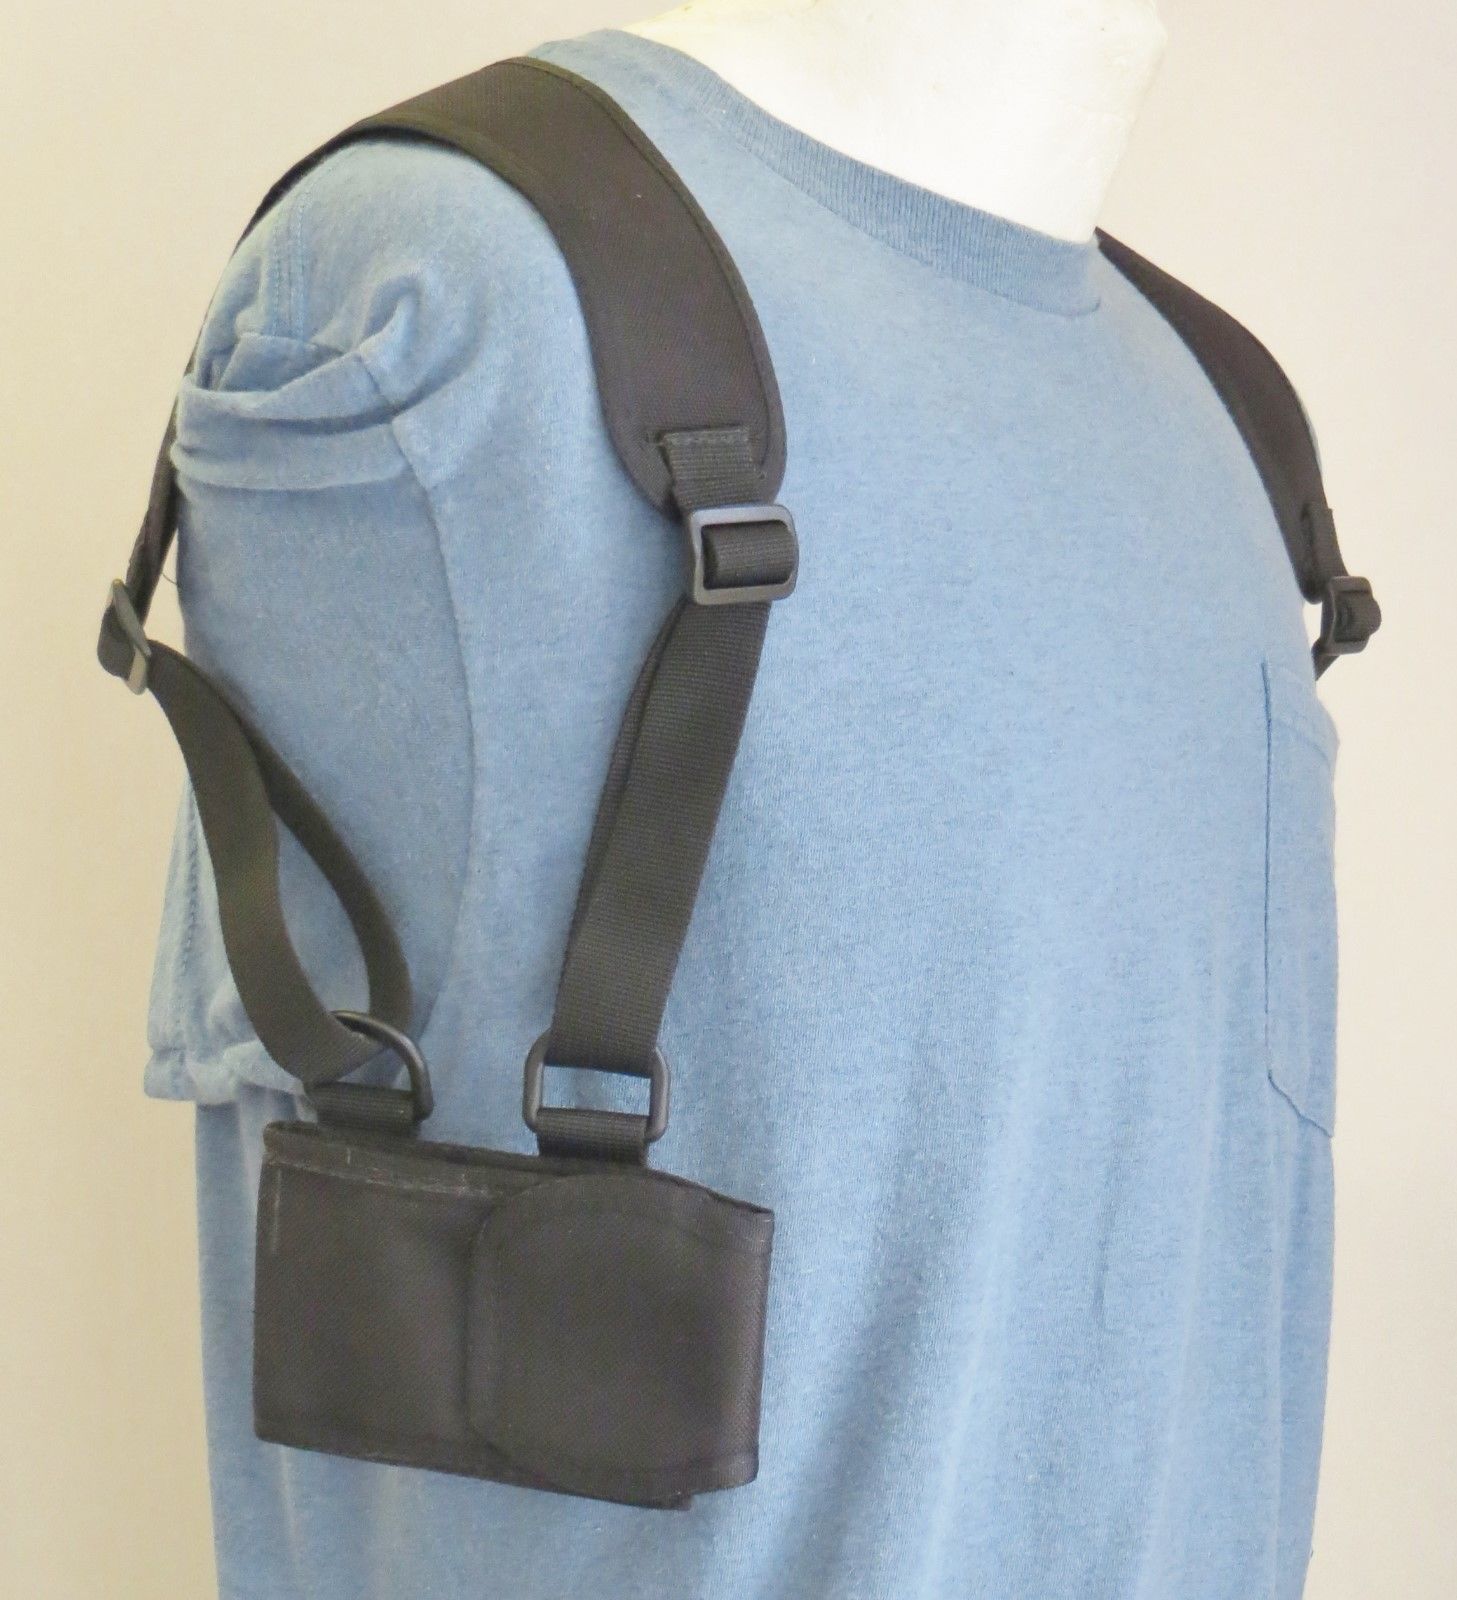 Shoulder Holster For Two Cell Phones - PHONES UP TO 5 1/2" TALL AND 3